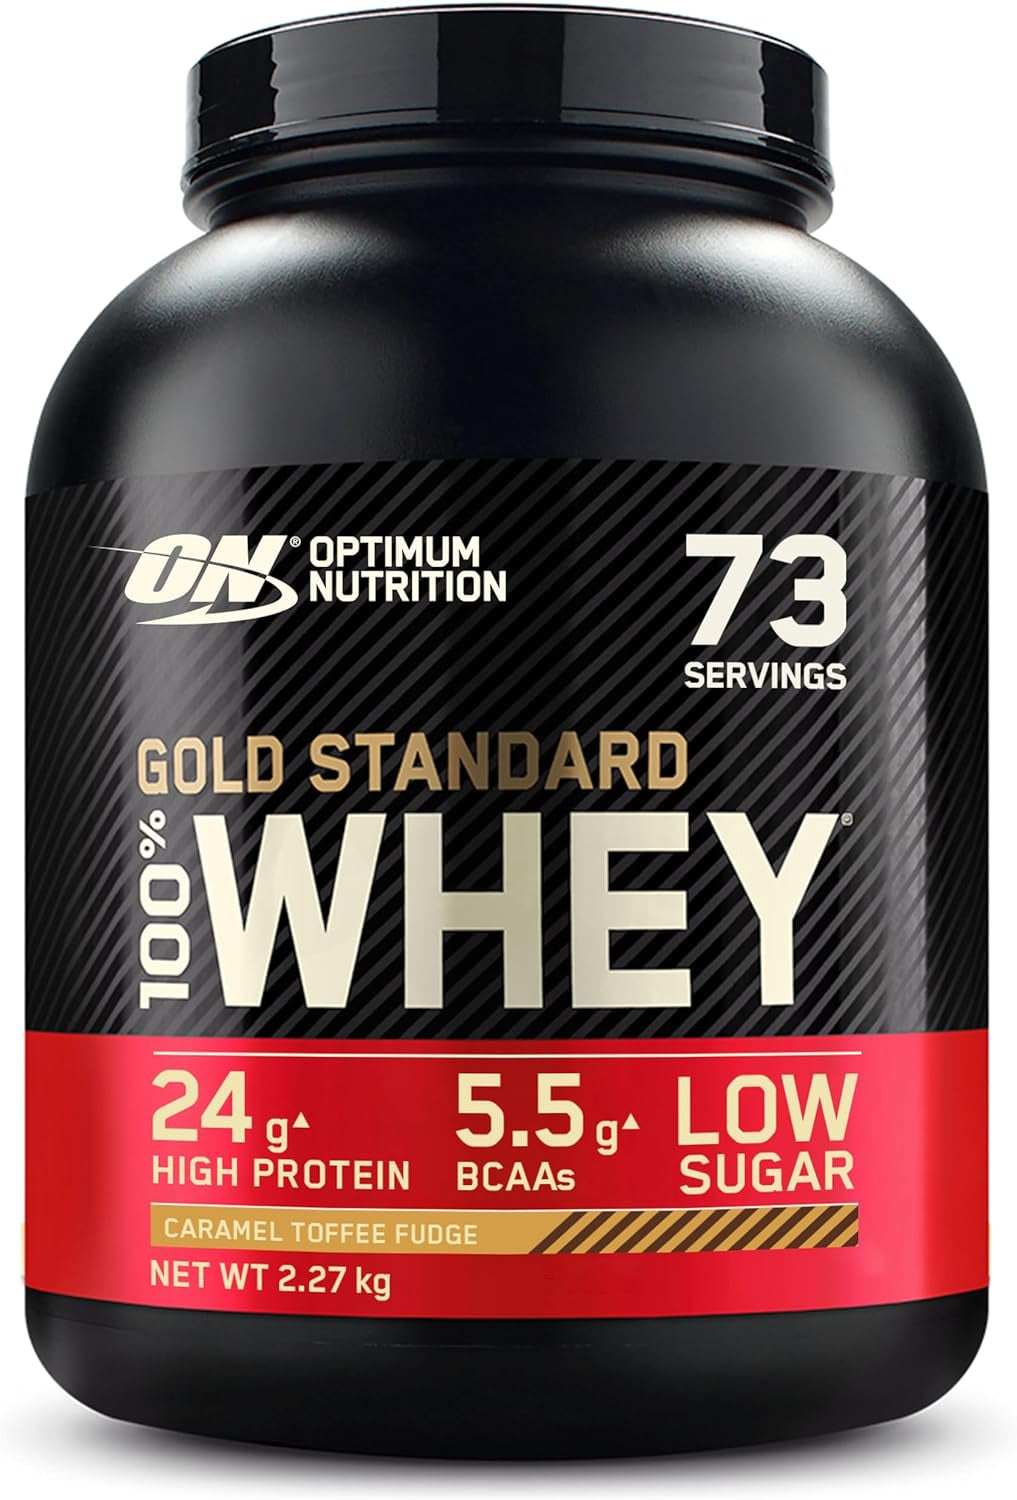 Gold Standard 100% Whey Muscle Building and Recovery Protein Powder with Naturally Occurring Glutamine and BCAA Amino Acids, Caramel Toffee Fudge Flavour, 73 Servings, 2.27 Kg